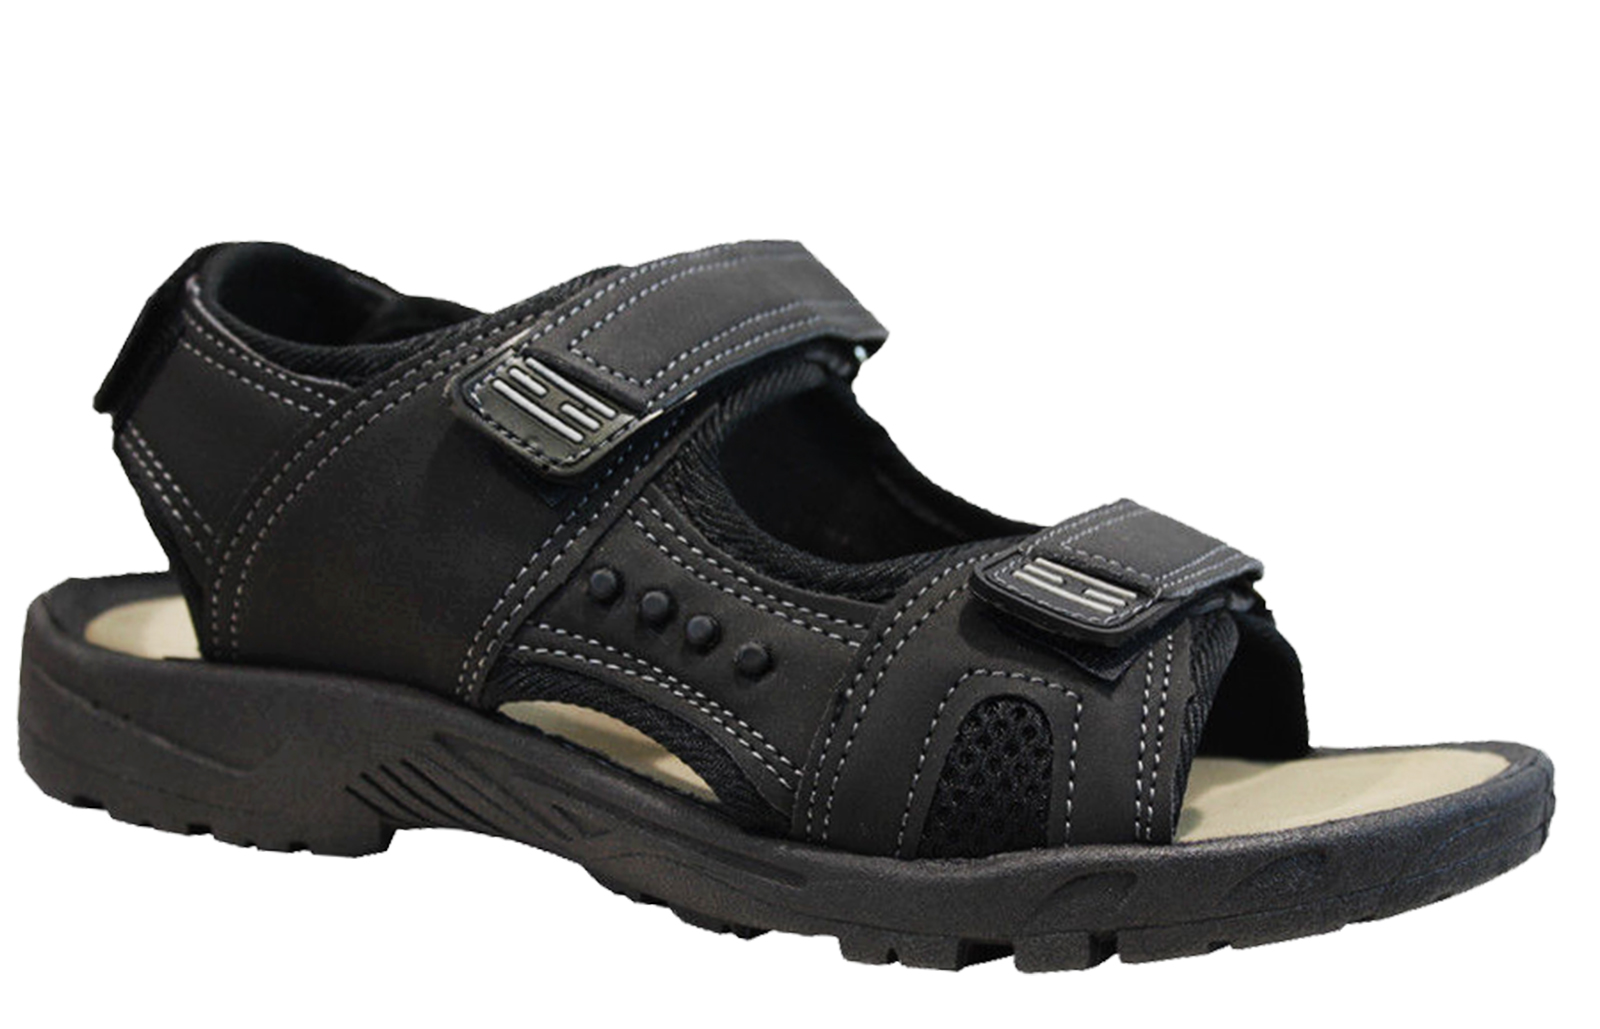 MENS BLACK TOUCH STRAP FLAT WALKING OPEN-TOE SANDALS TRAIL CASUAL SHOES ...